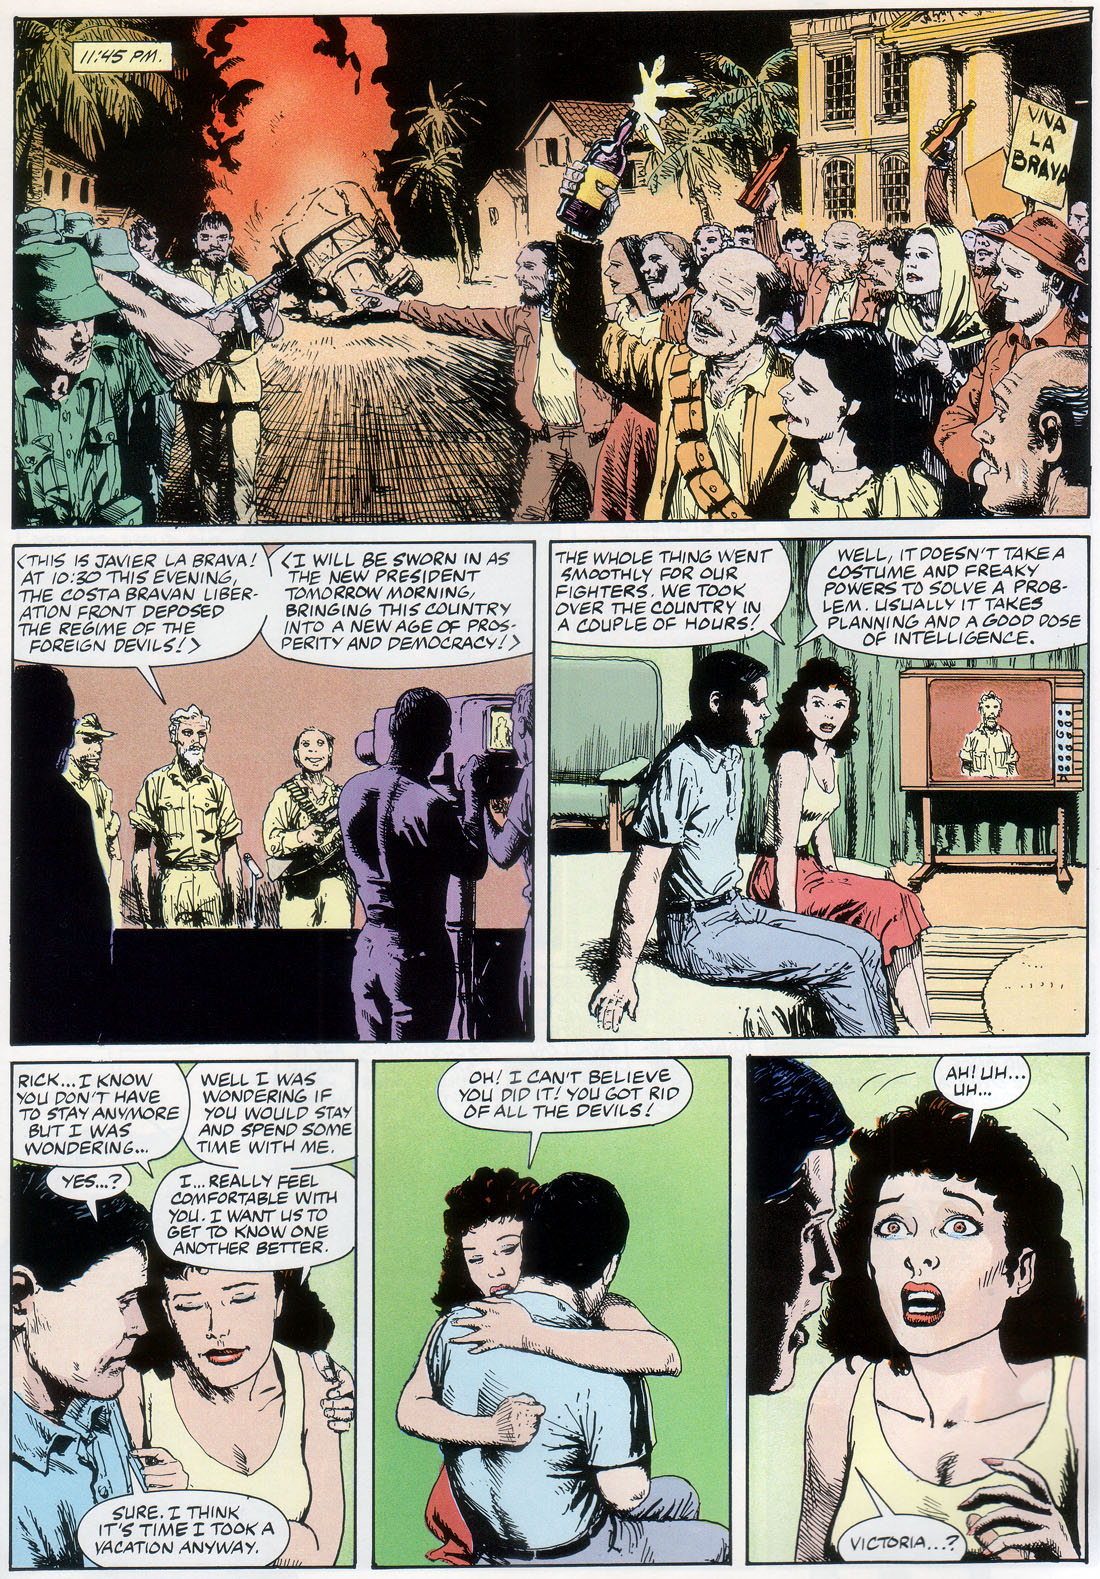 Marvel Graphic Novel issue 57 - Rick Mason - The Agent - Page 75